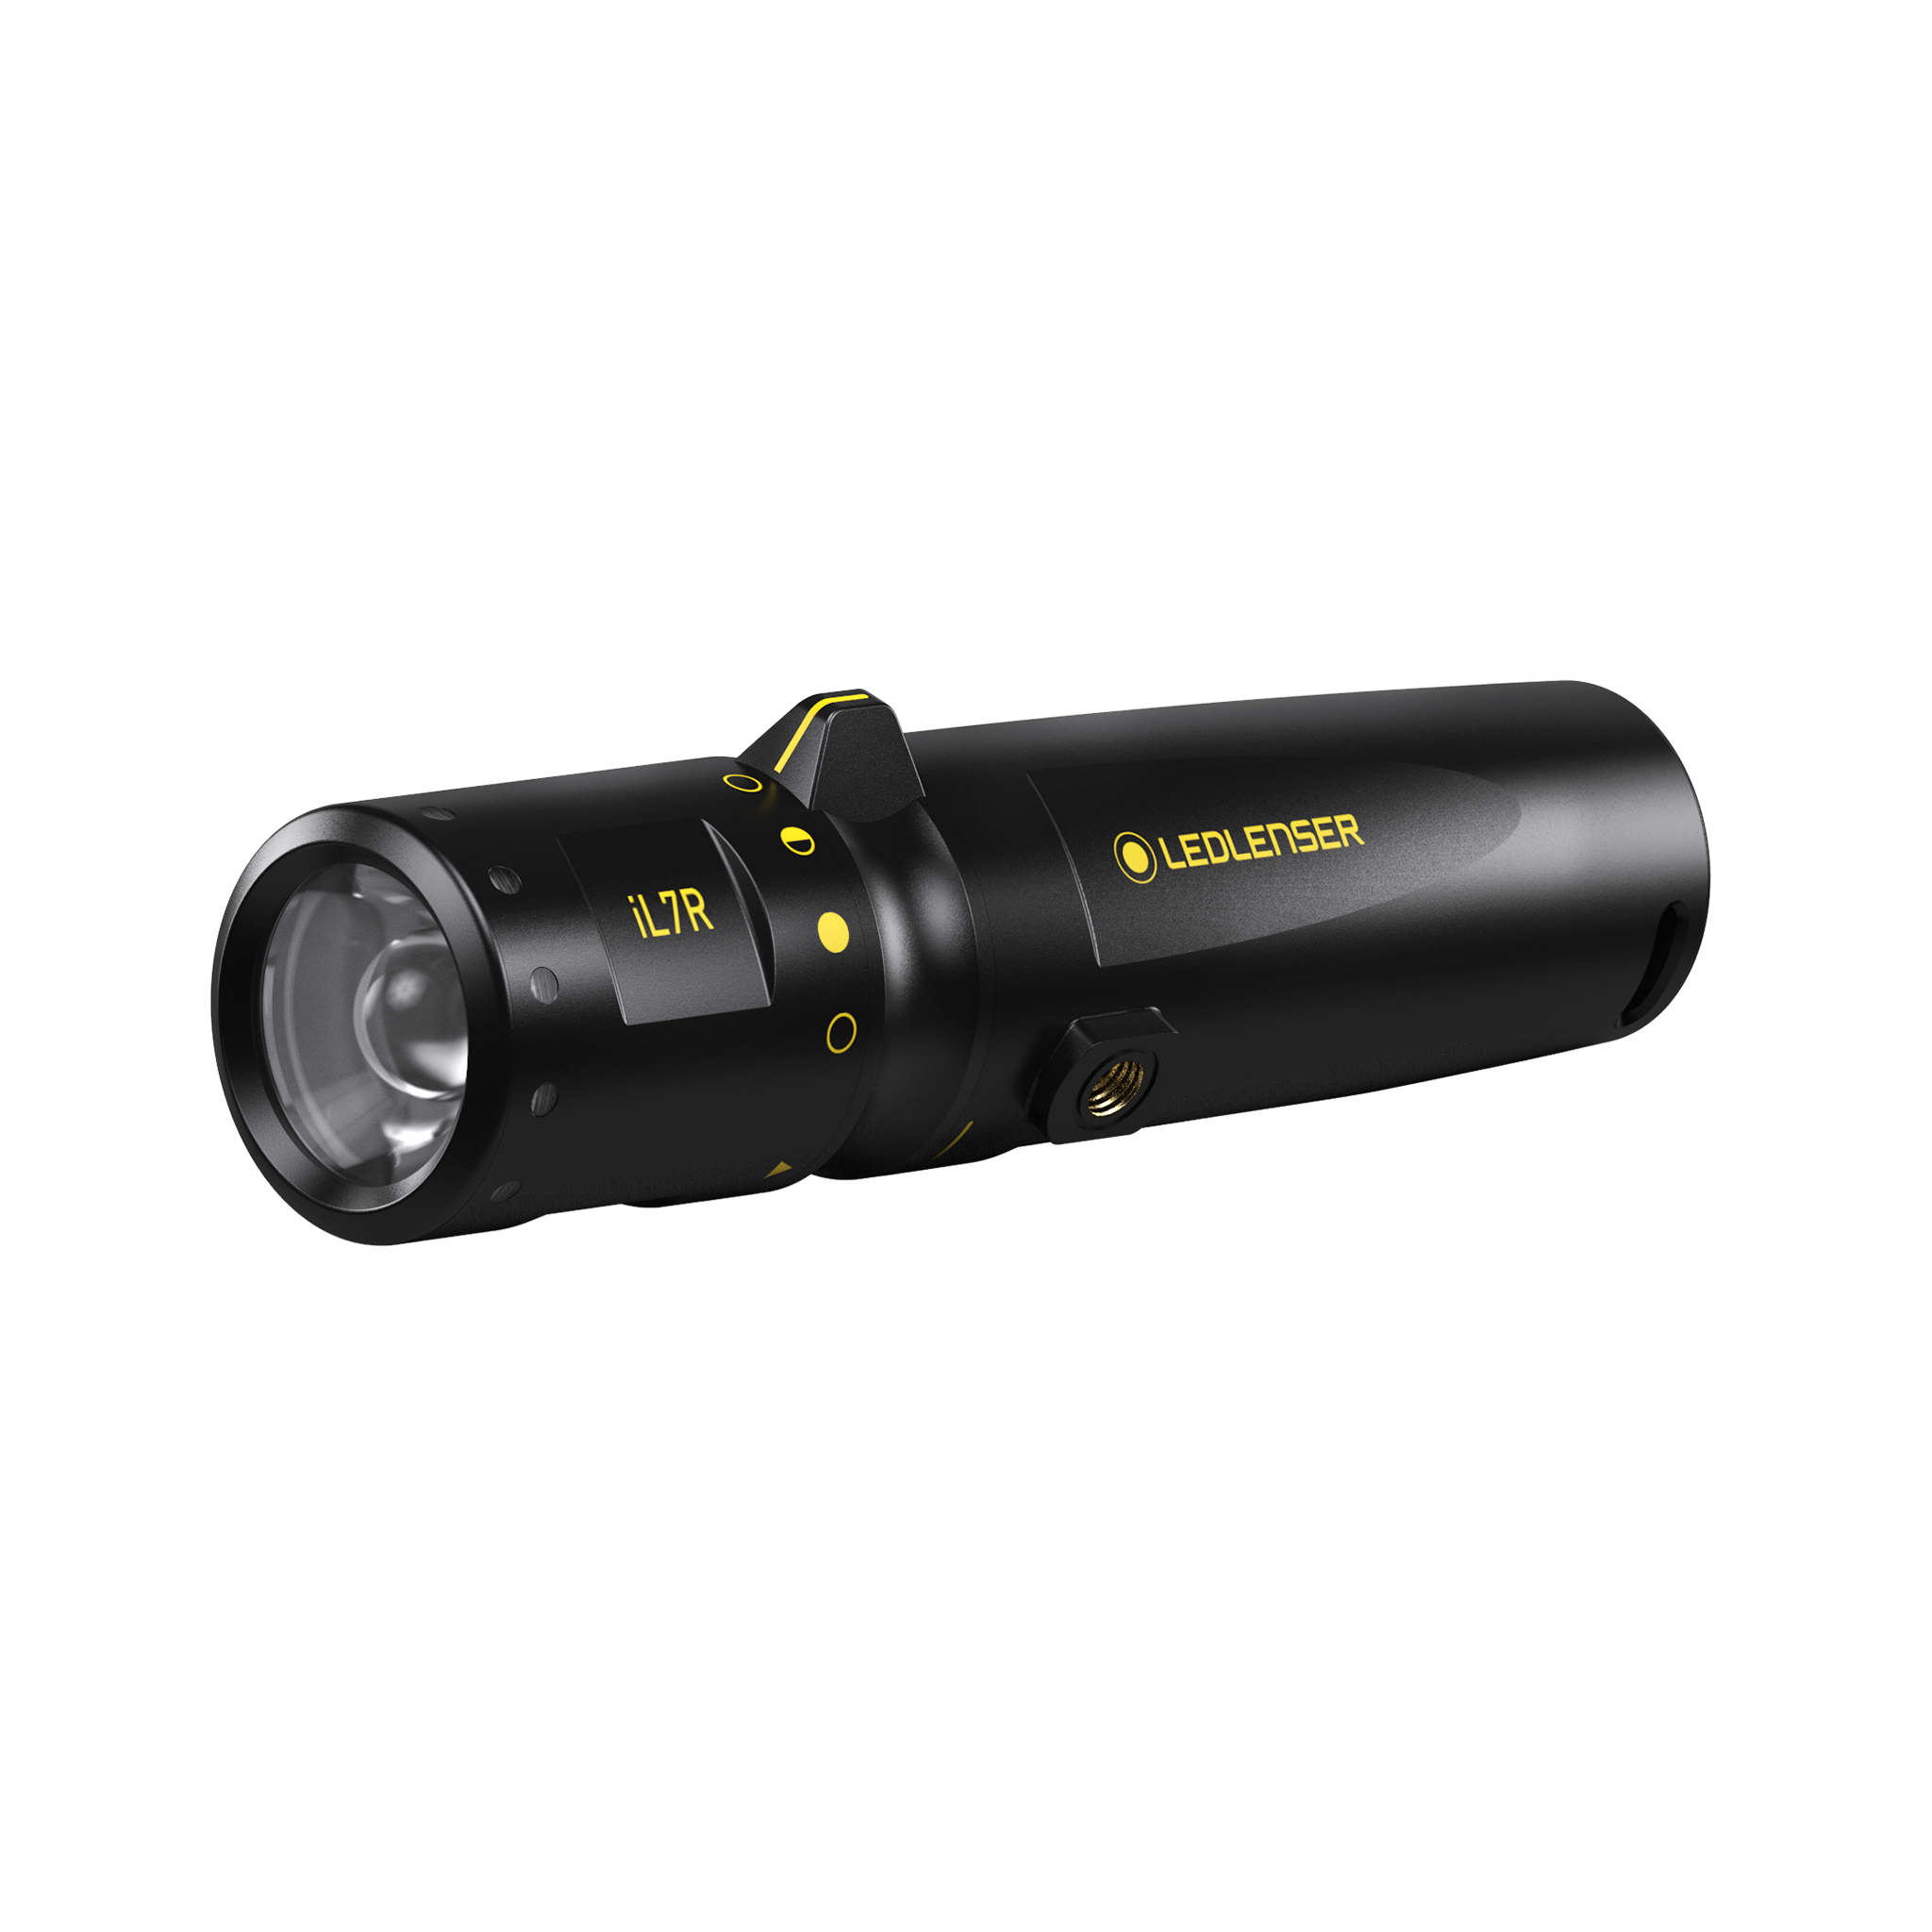 Ledlenser EX7R Intrinsically Safe Rechargeable Torch | Zone 1/21